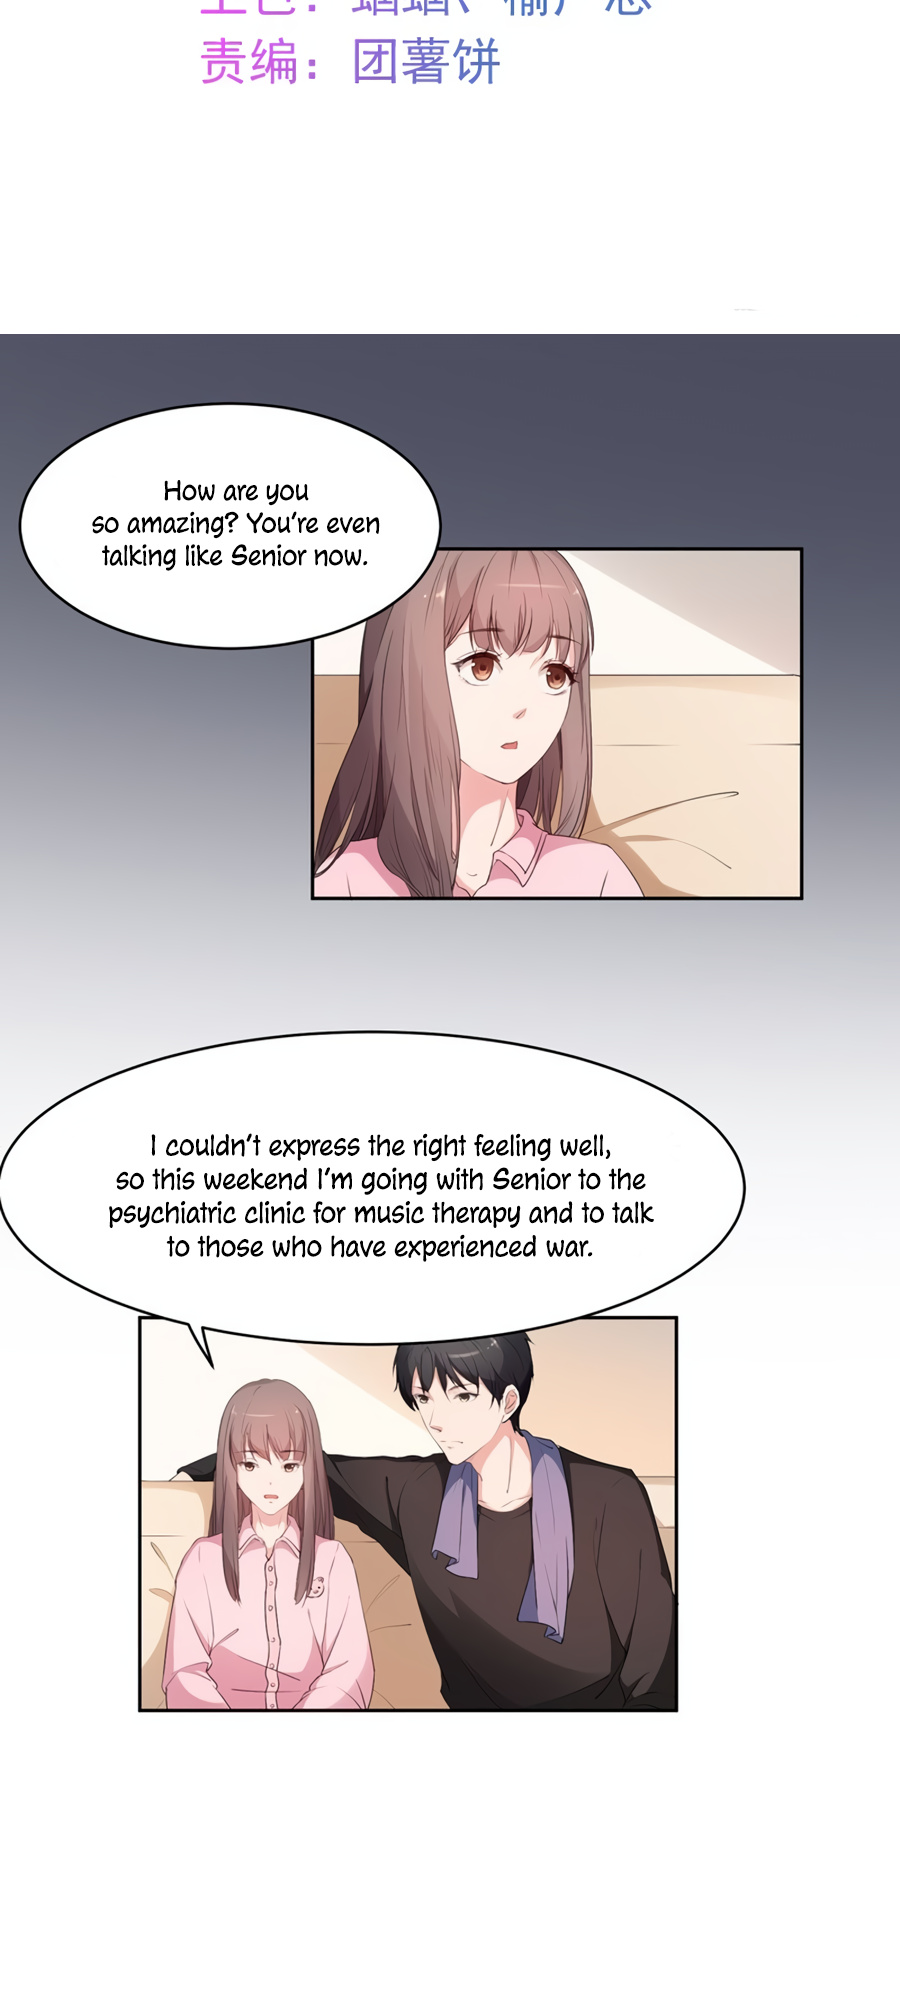 Unwanted Crush - Page 2